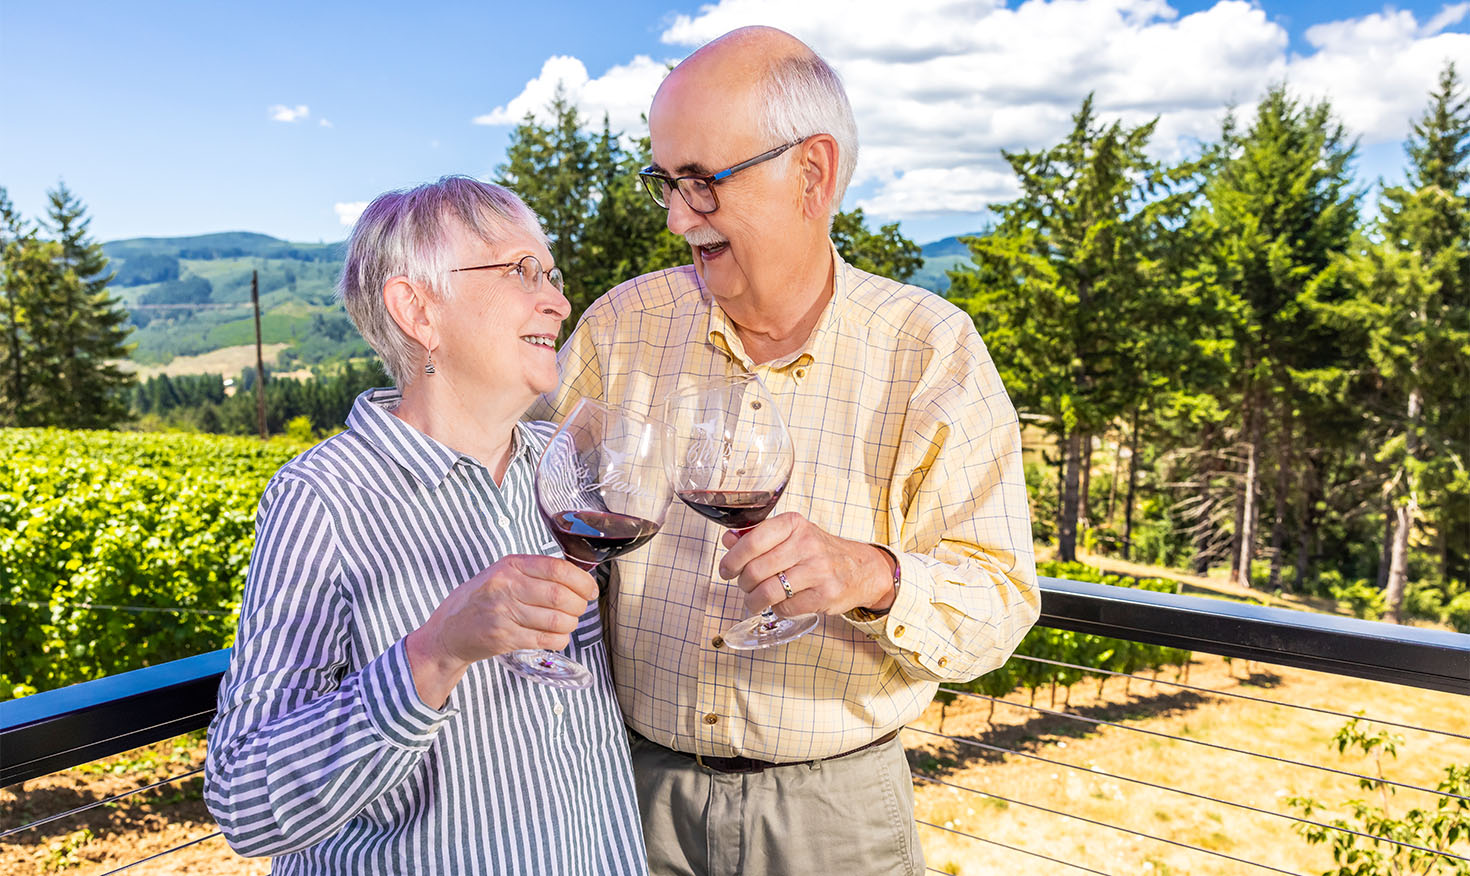 Senior couple in a vineyard clinking wine glasses while gazing at each other and smiling